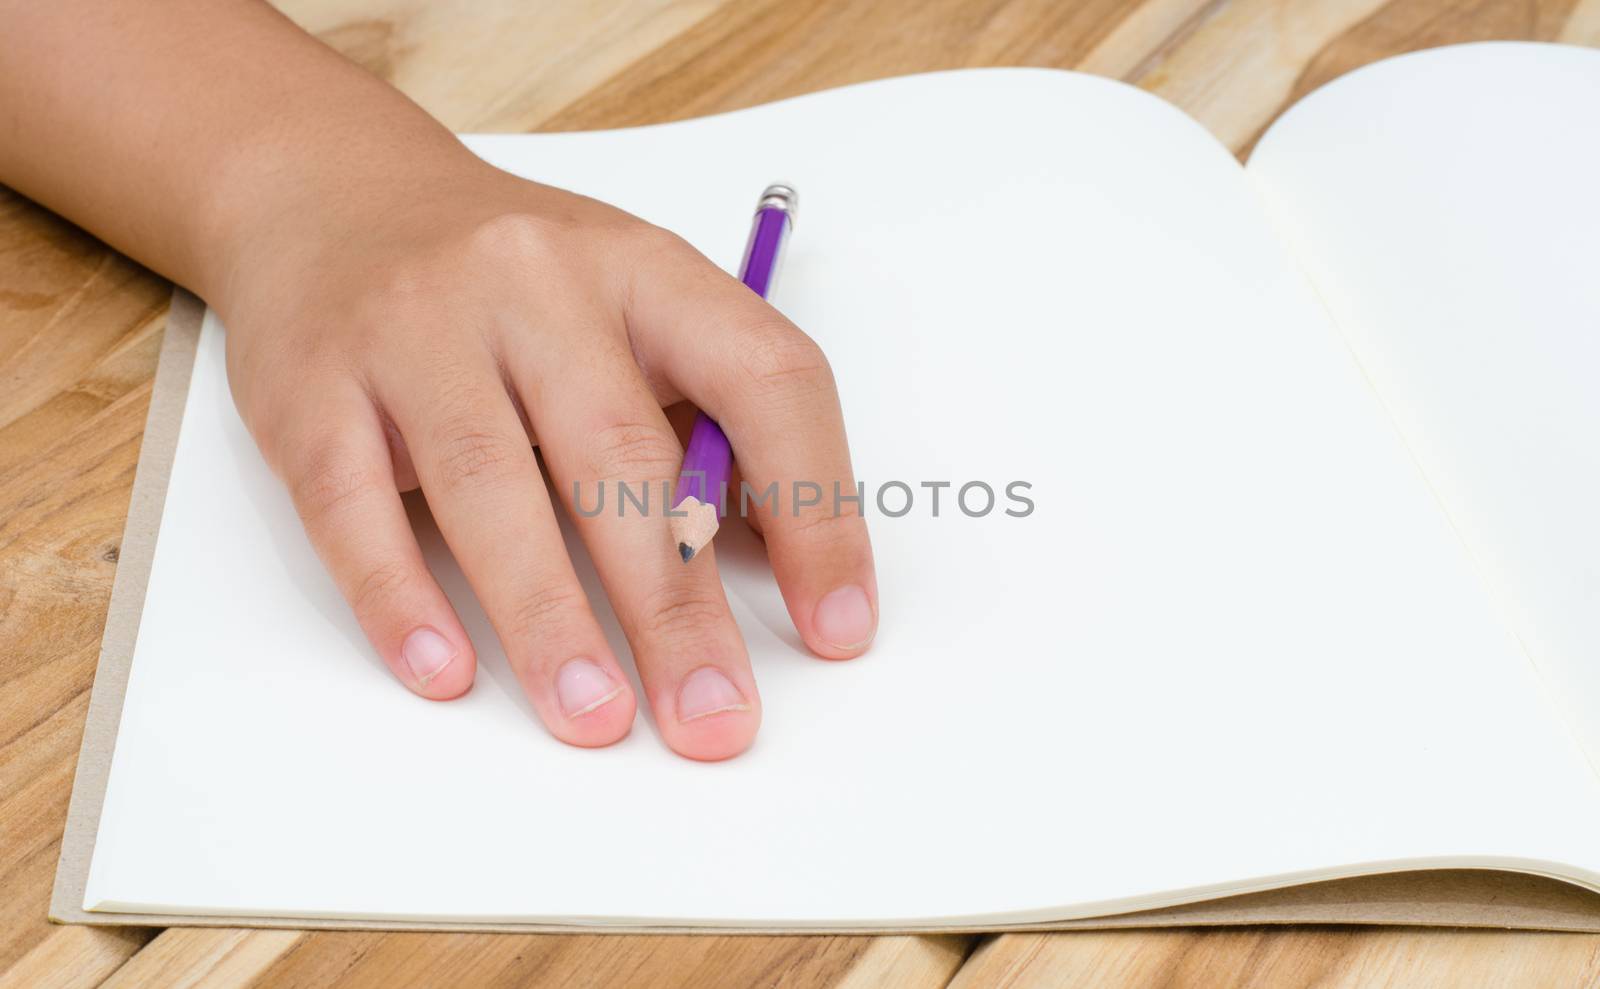 Hand writing in open notebook on table